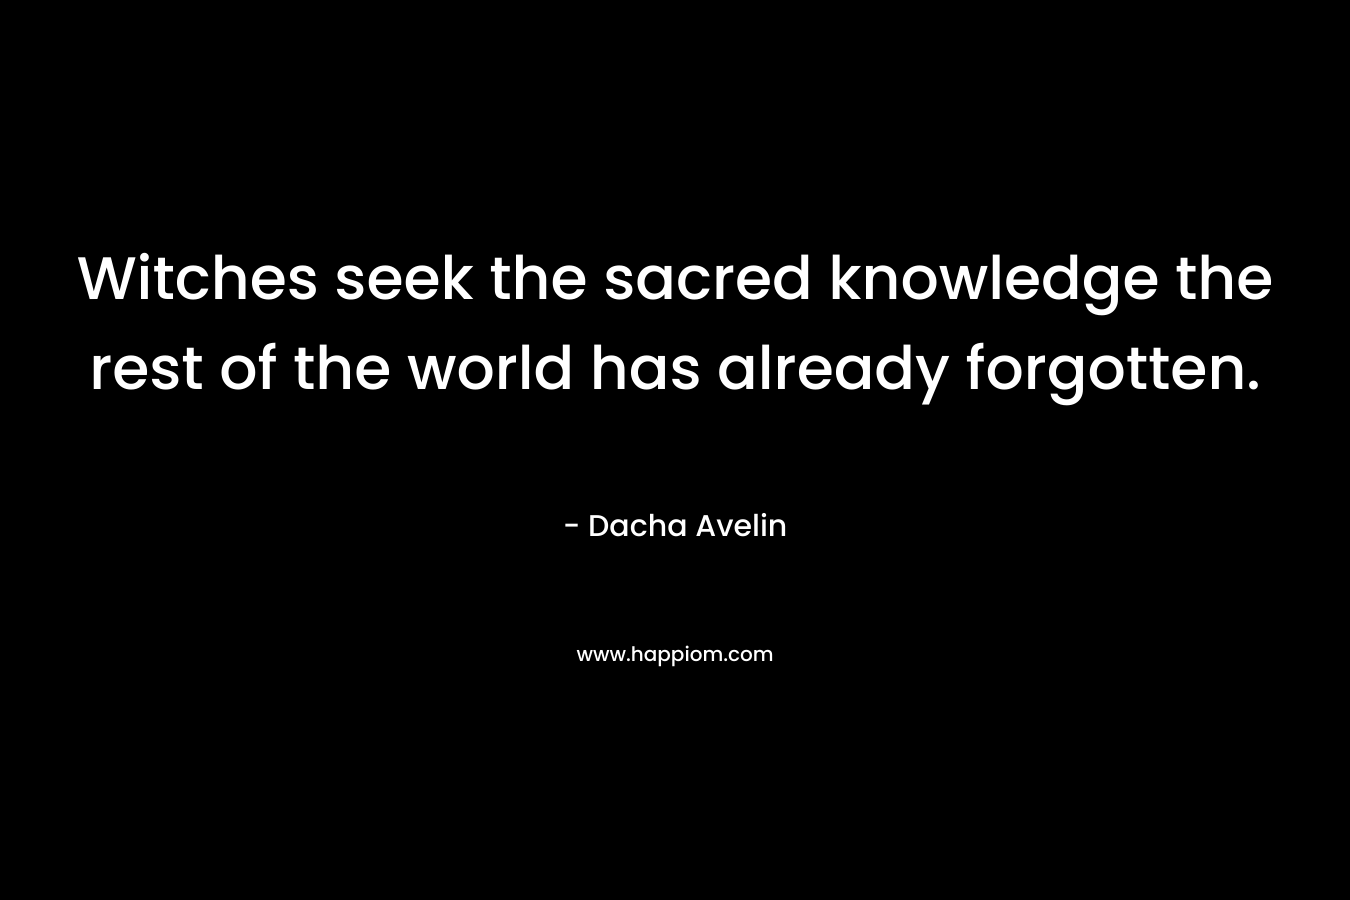 Witches seek the sacred knowledge the rest of the world has already forgotten. – Dacha Avelin